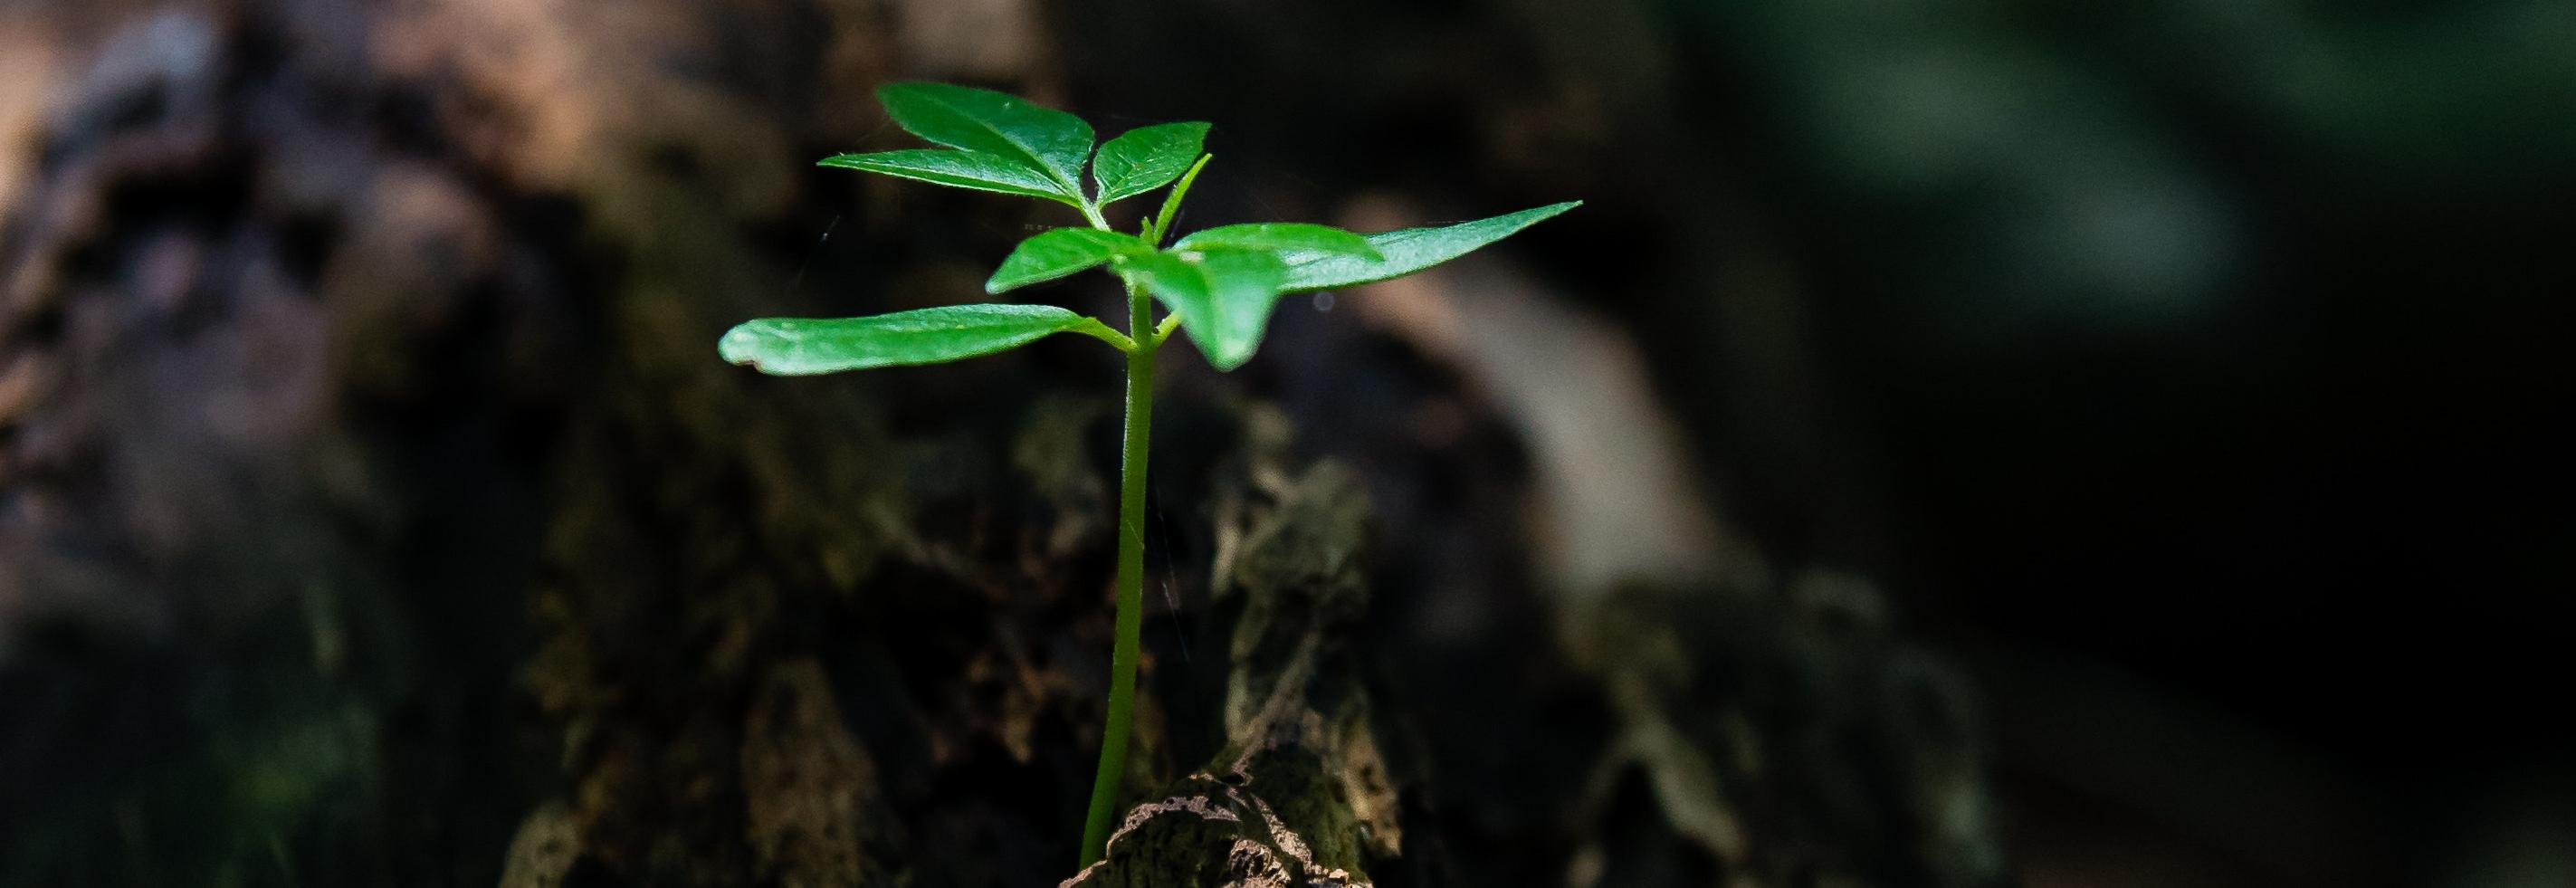 Small seedling on a tree trunk